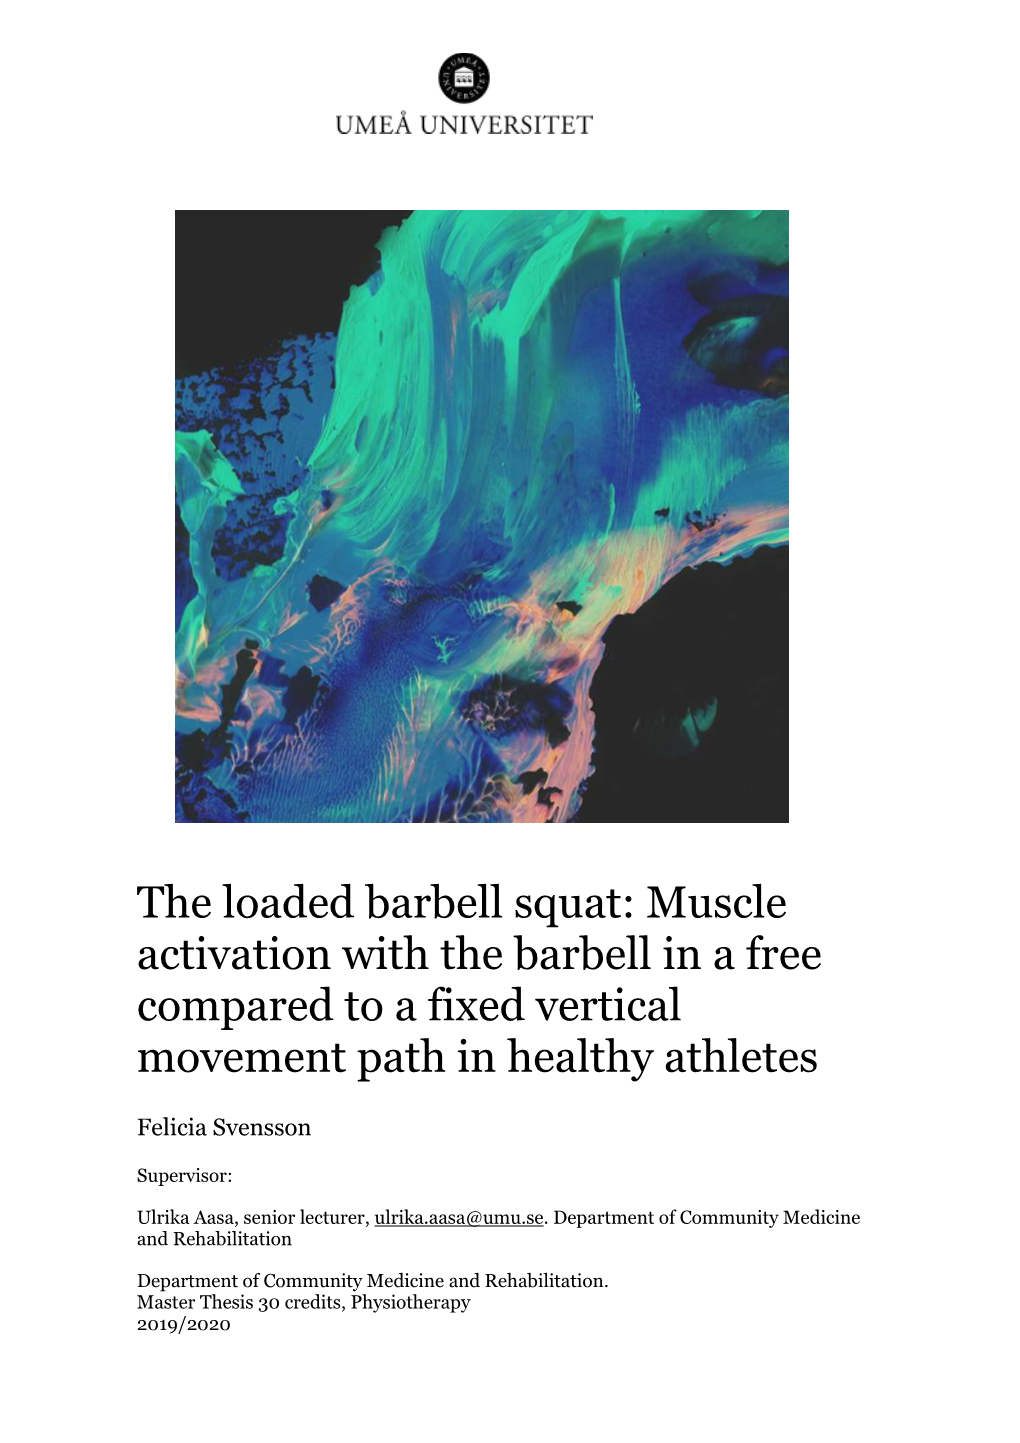 The Loaded Barbell Squat: Muscle Activation with the Barbell in a Free Compared to a Fixed Vertical Movement Path in Healthy Athletes